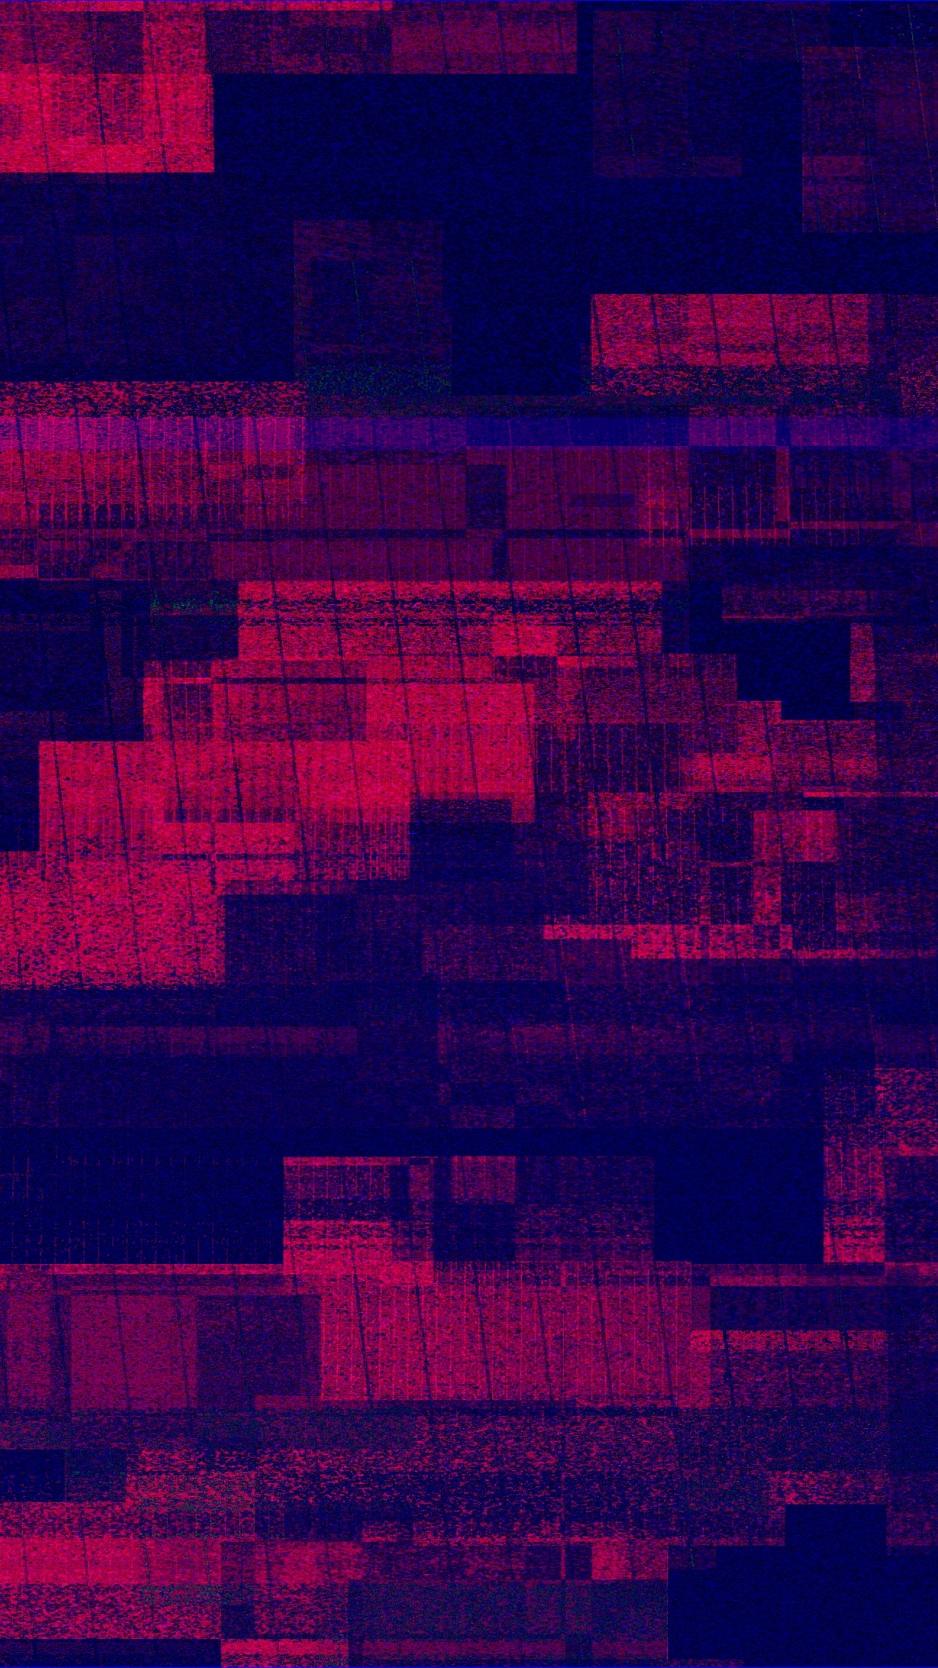 Glitch Art Wallpaper (image in Collection)